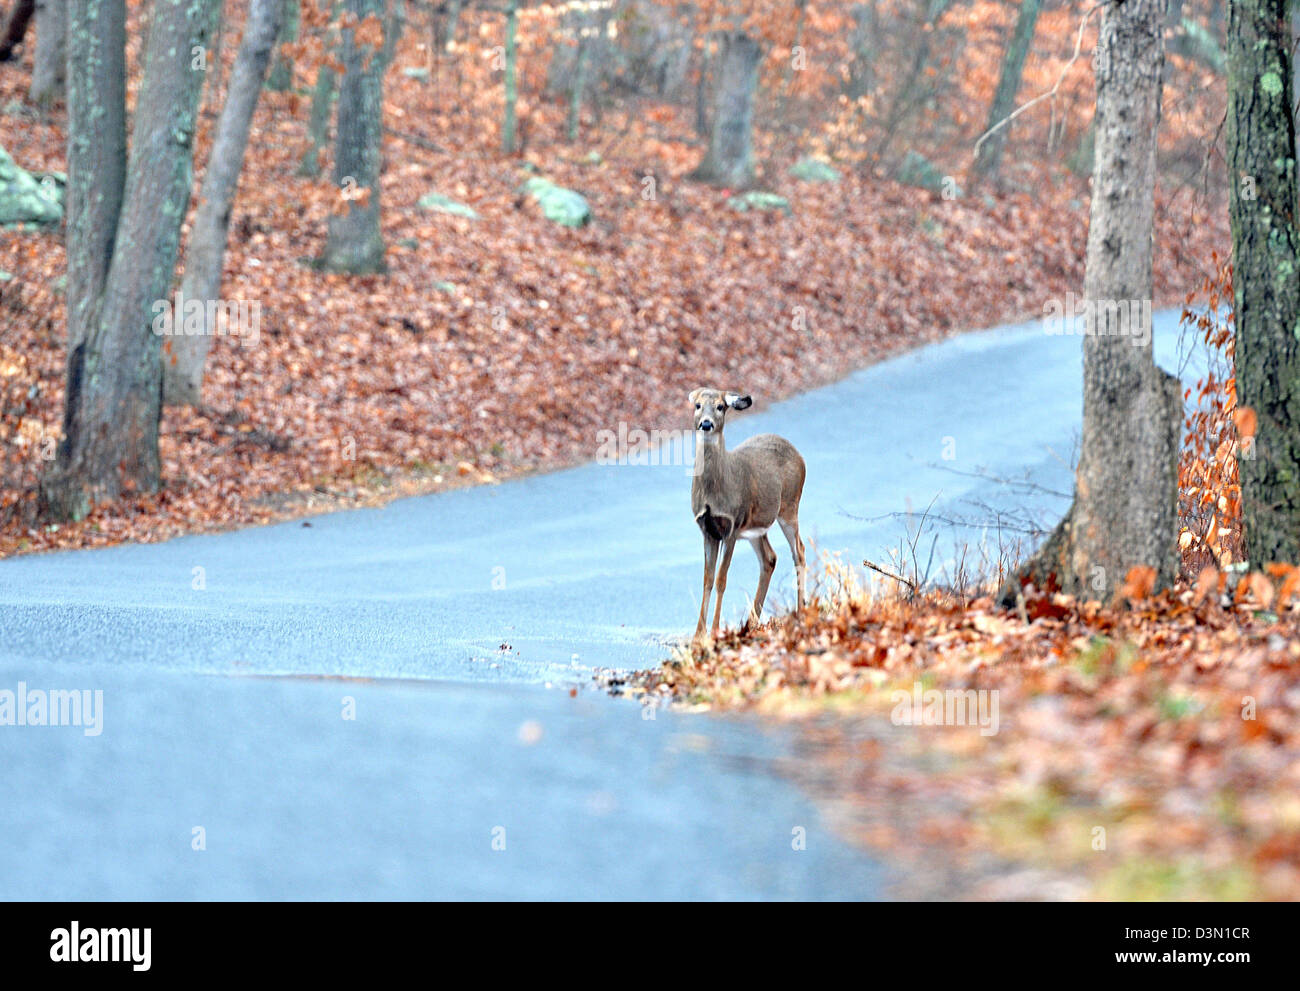 A deer in the road in Madison CT USA near a dangerous curve. Many deer are hit in CT by automobiles. Stock Photo